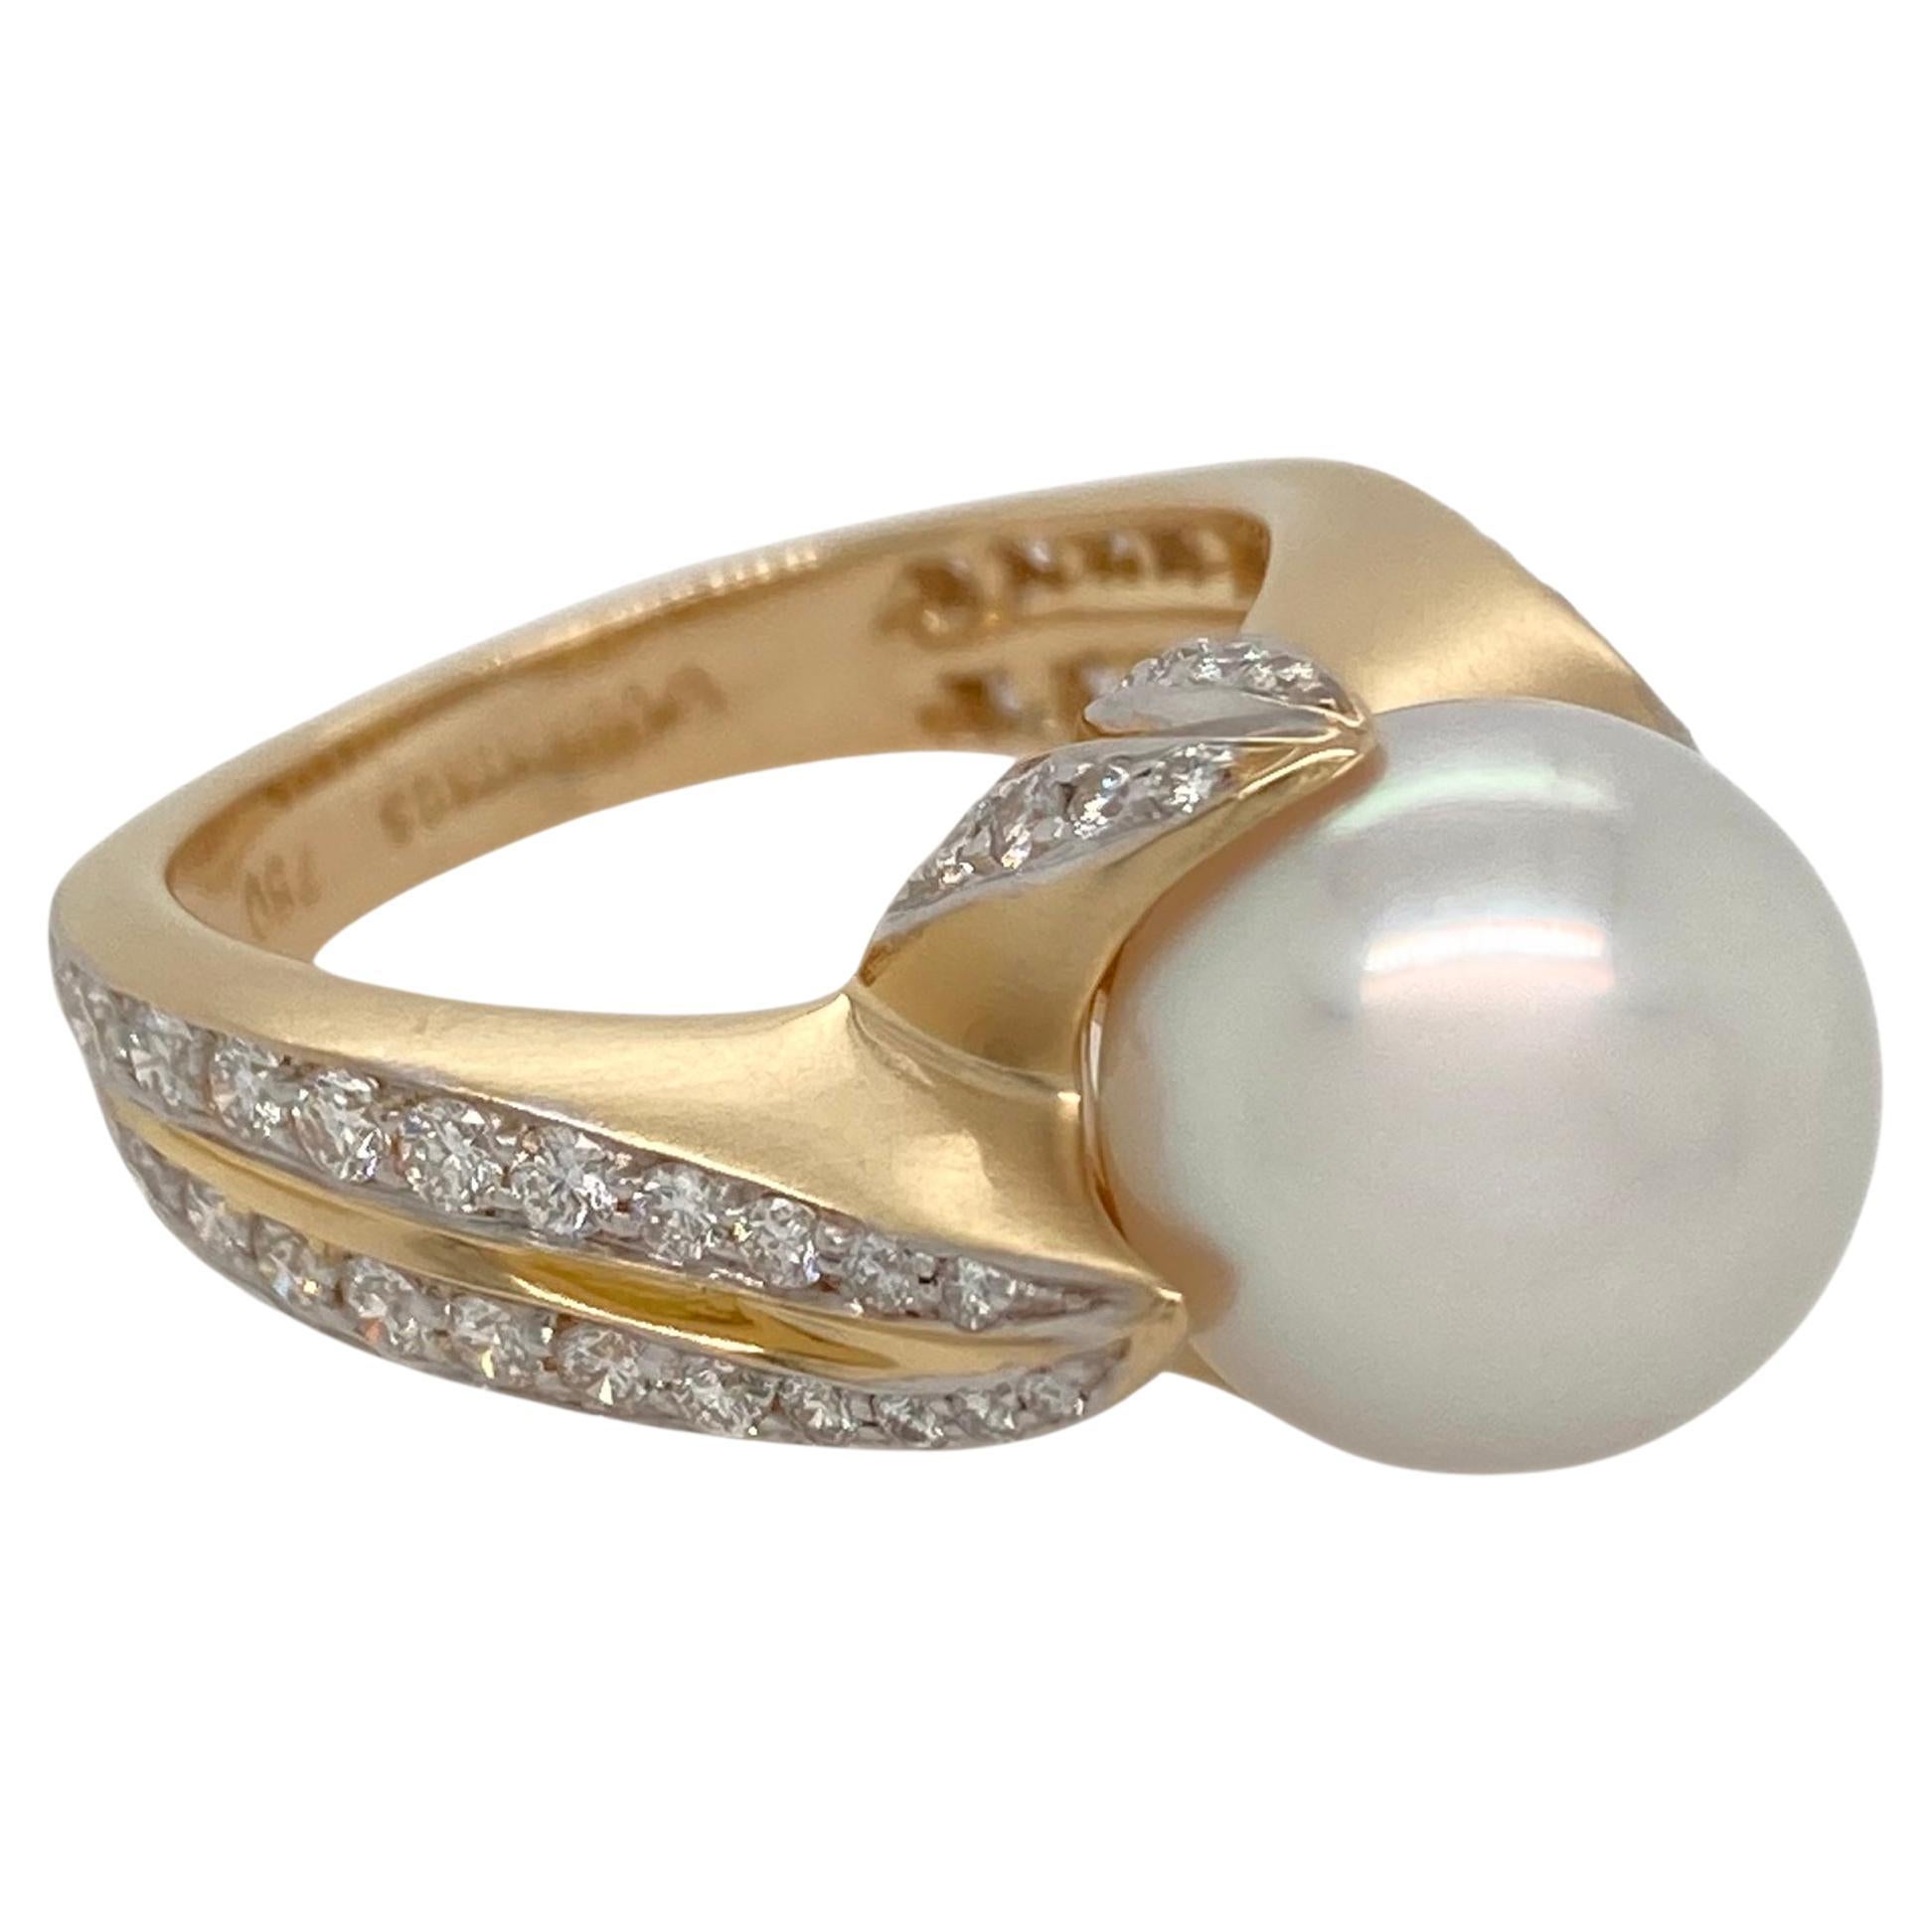 Rarely seen. Assael is a name synonymous with the finest pearls of the world and Angela Cummings is renowned for her impeccable designs. Put them together in this one of a kind 